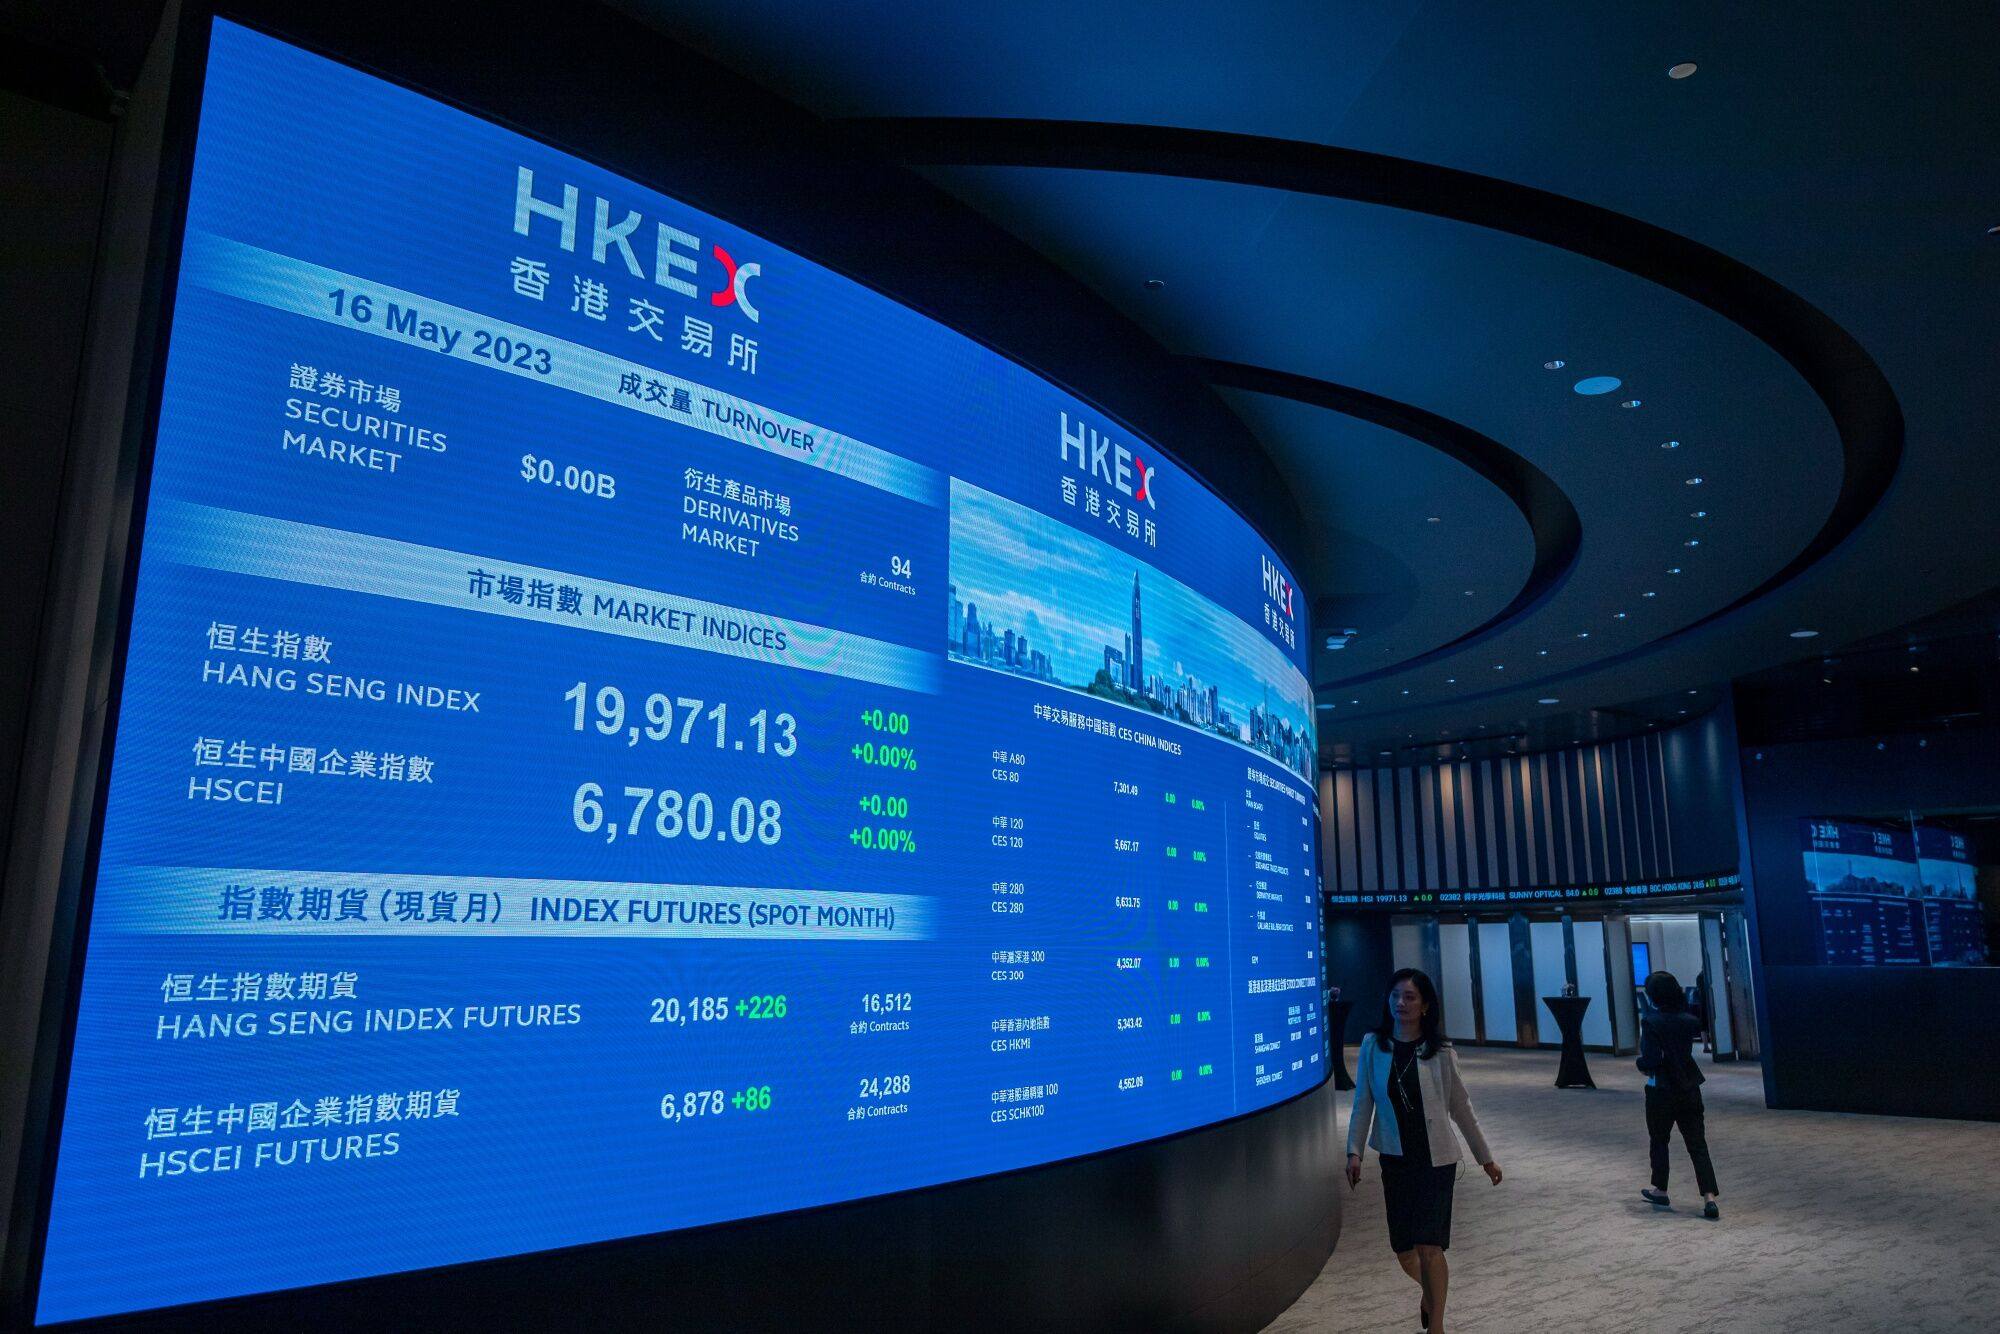 The operator of Hong Kong stock exchange is to launch an initial public offering (IPO) settlement platform that will shorten the time between the pricing of a new listing and the trading of shares. Photo: Bloomberg